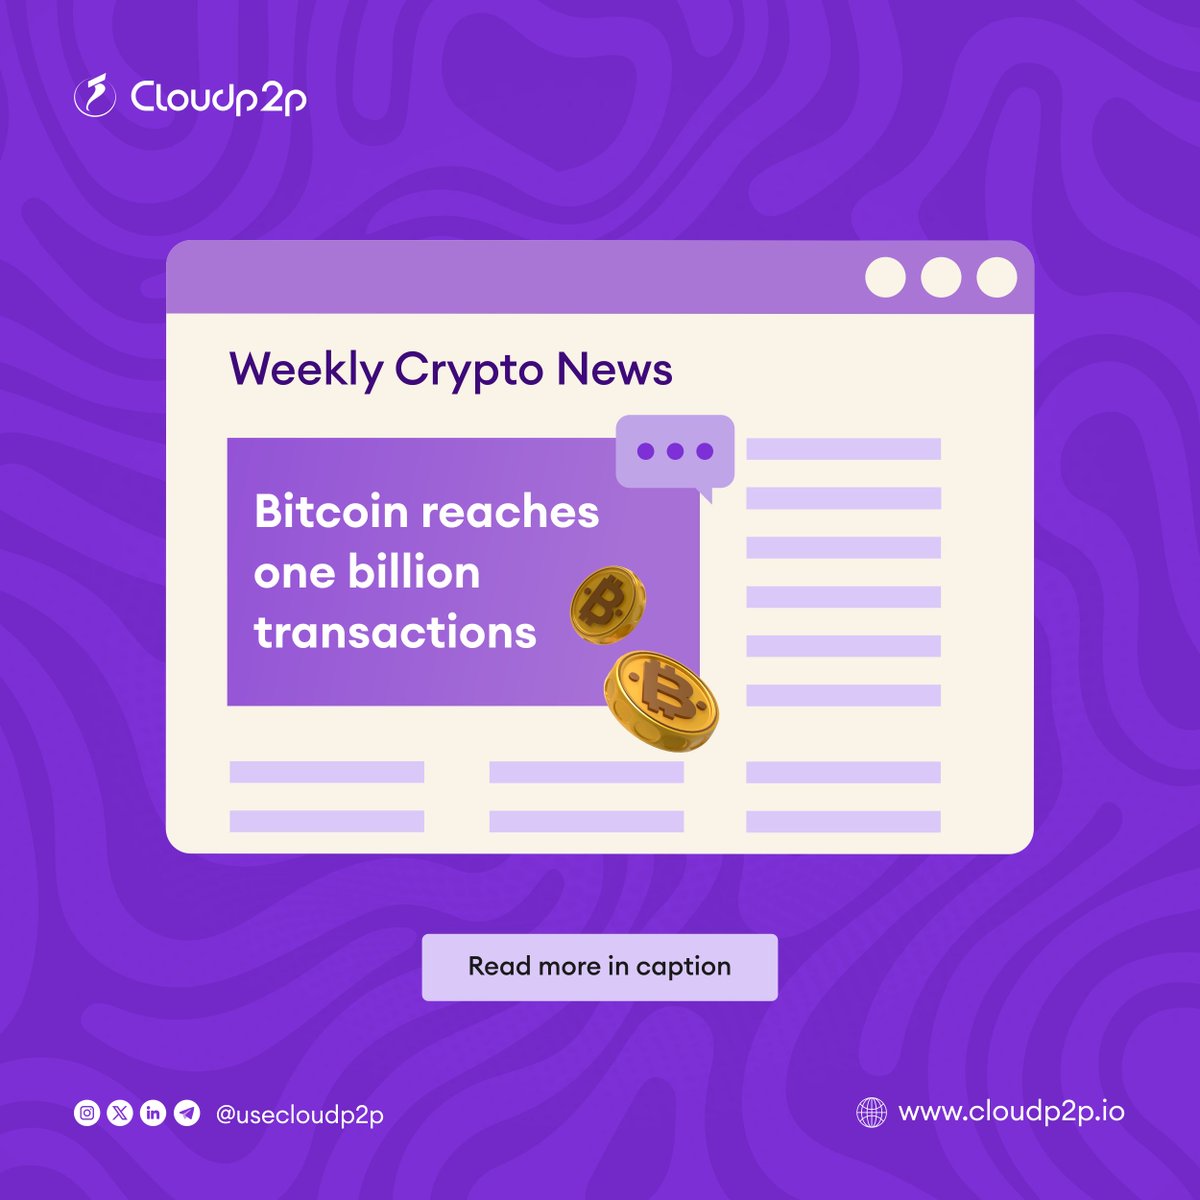 Gm, Fam.

Check out what happened in the crypto world this week👇

#cloudp2p #WeeklyRoundup #cryptonews #cryptocurreny